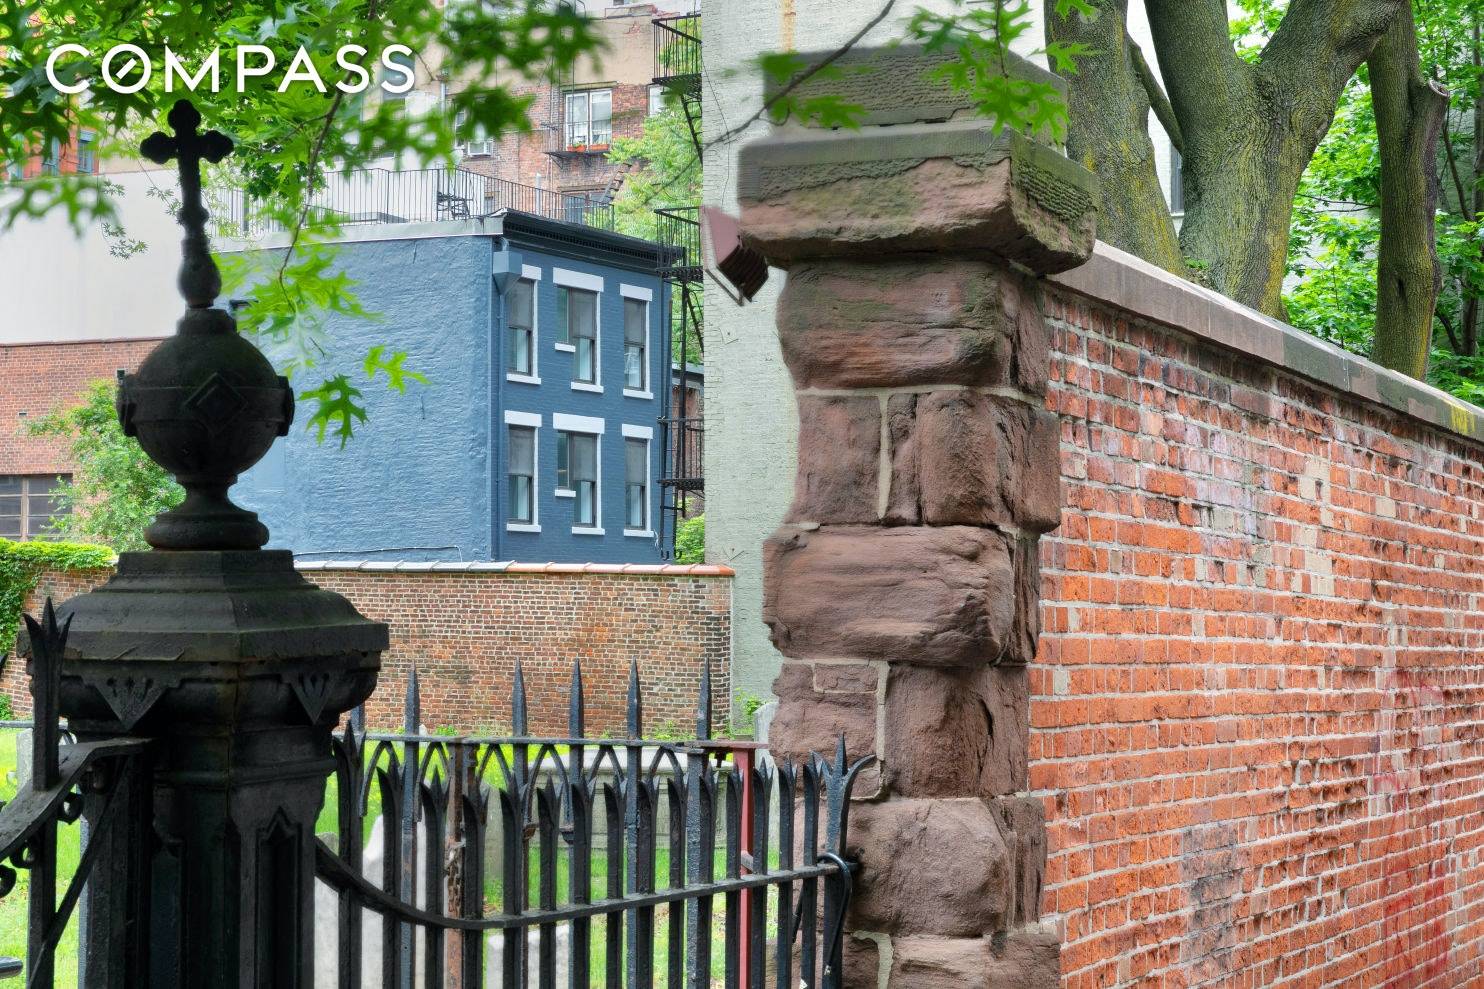 Once Upon a Time, a fairytale home hits the market in one of the best locations in Nolita.